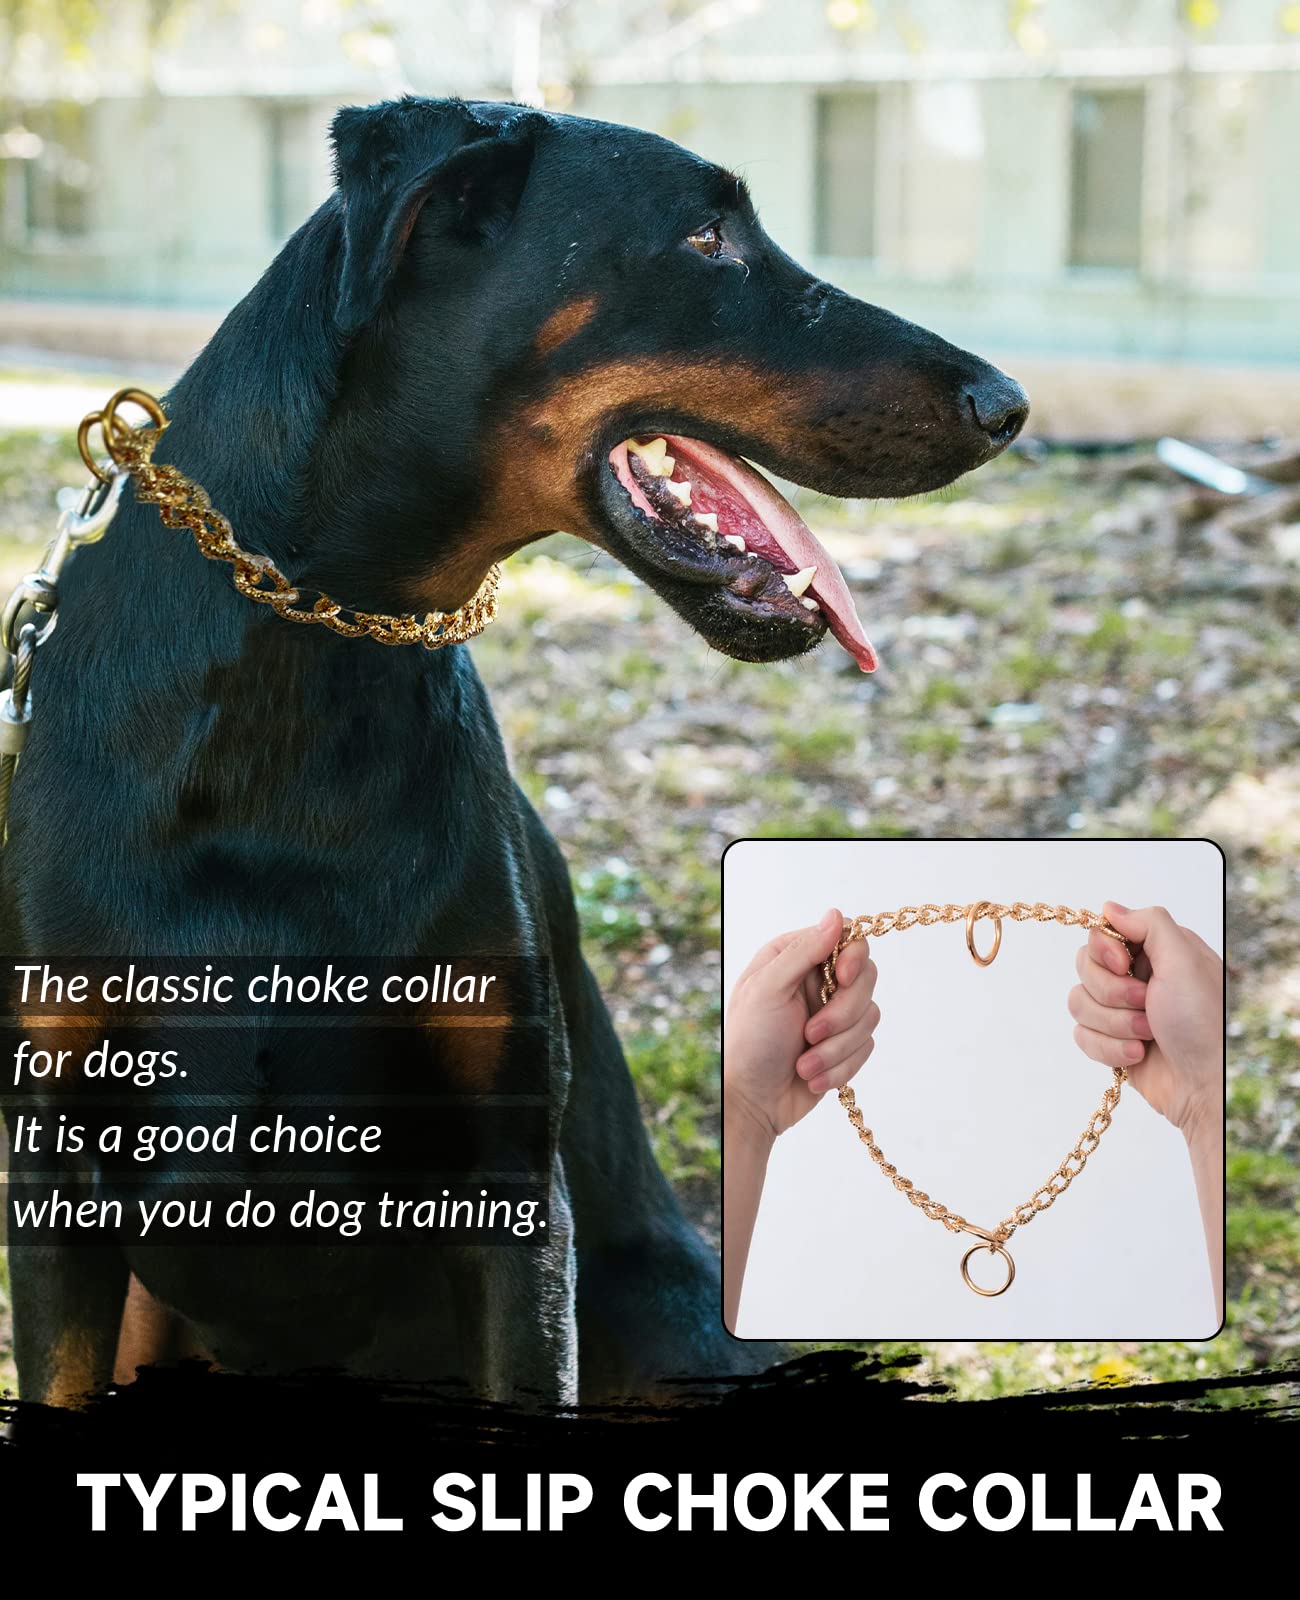 Cuban Link Dog Collar - 3/4 in Wide Metal Chain Dog Collar Venom Black, The Newest Design Stunning Pet Accessory, Cute Luxury Jewelry Costume 20 inches